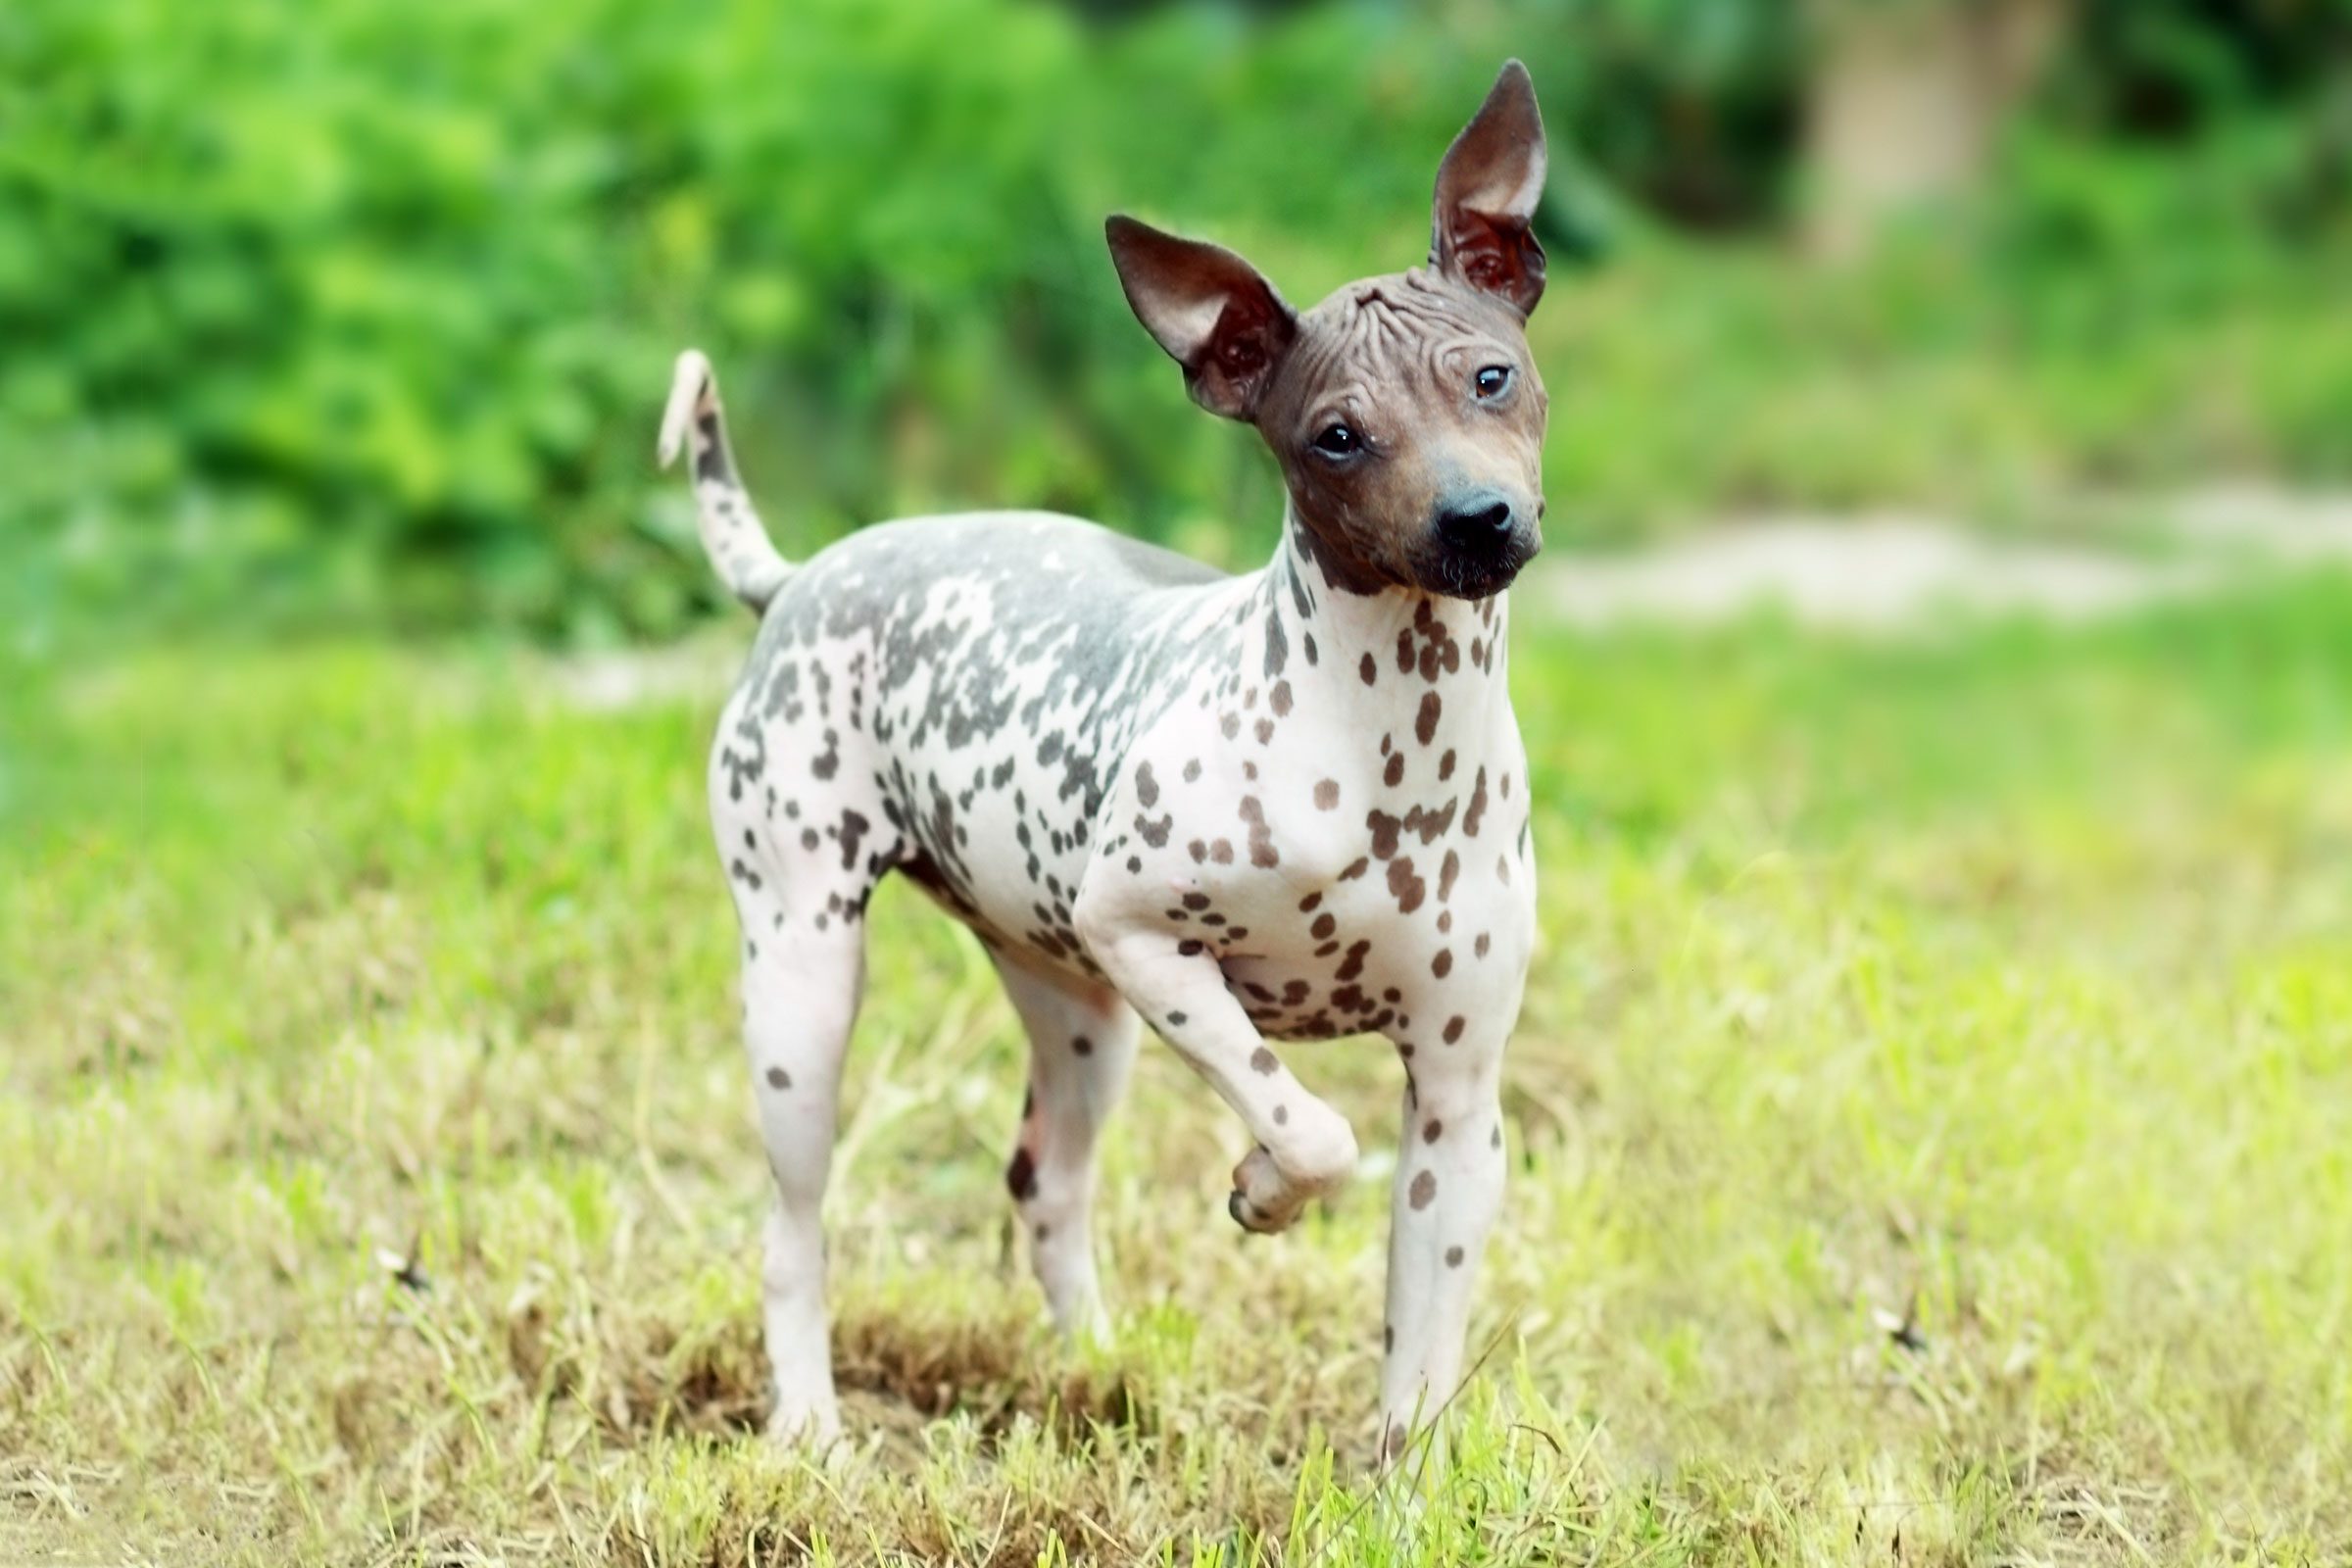 7 Hairless Dog Breeds That Make Great Pets — Dogs with No Hair